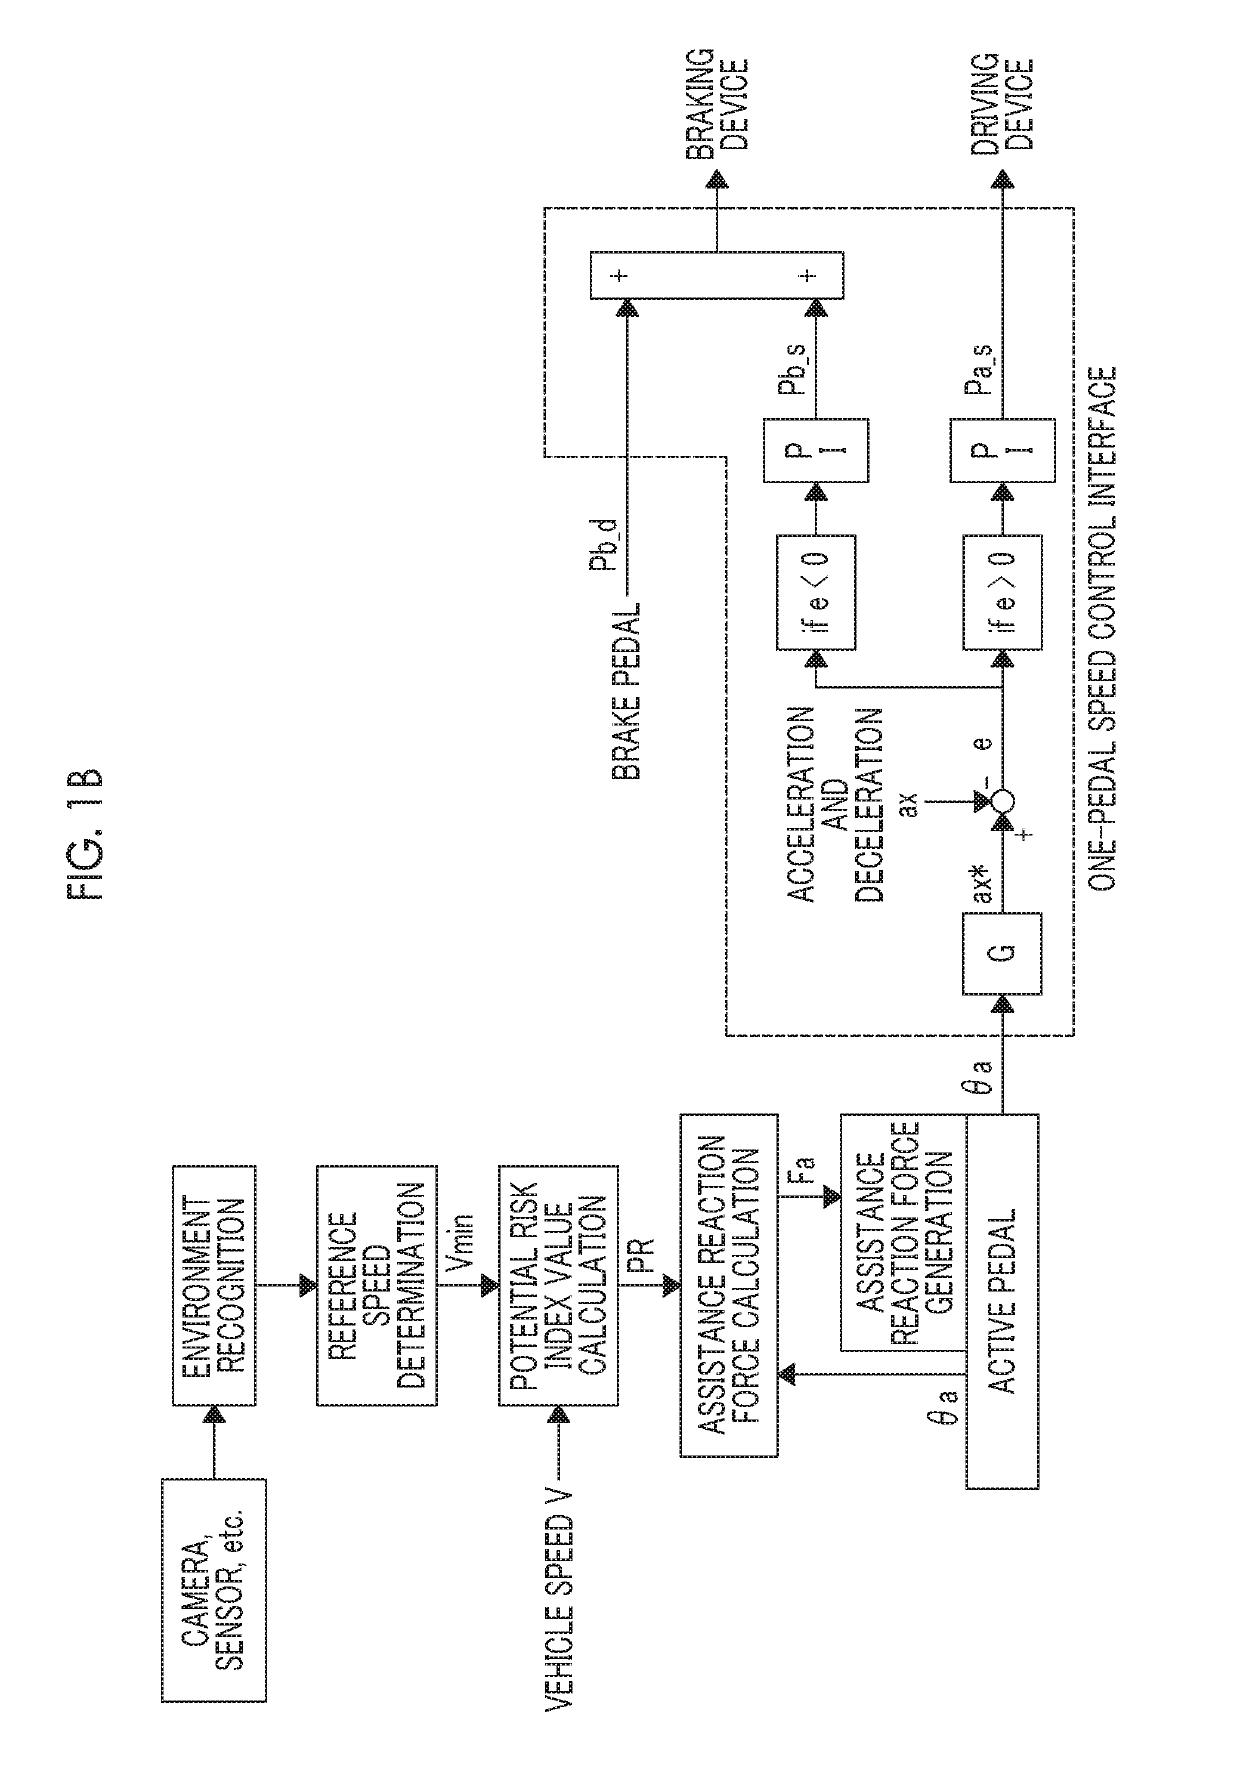 Driving assistance control device